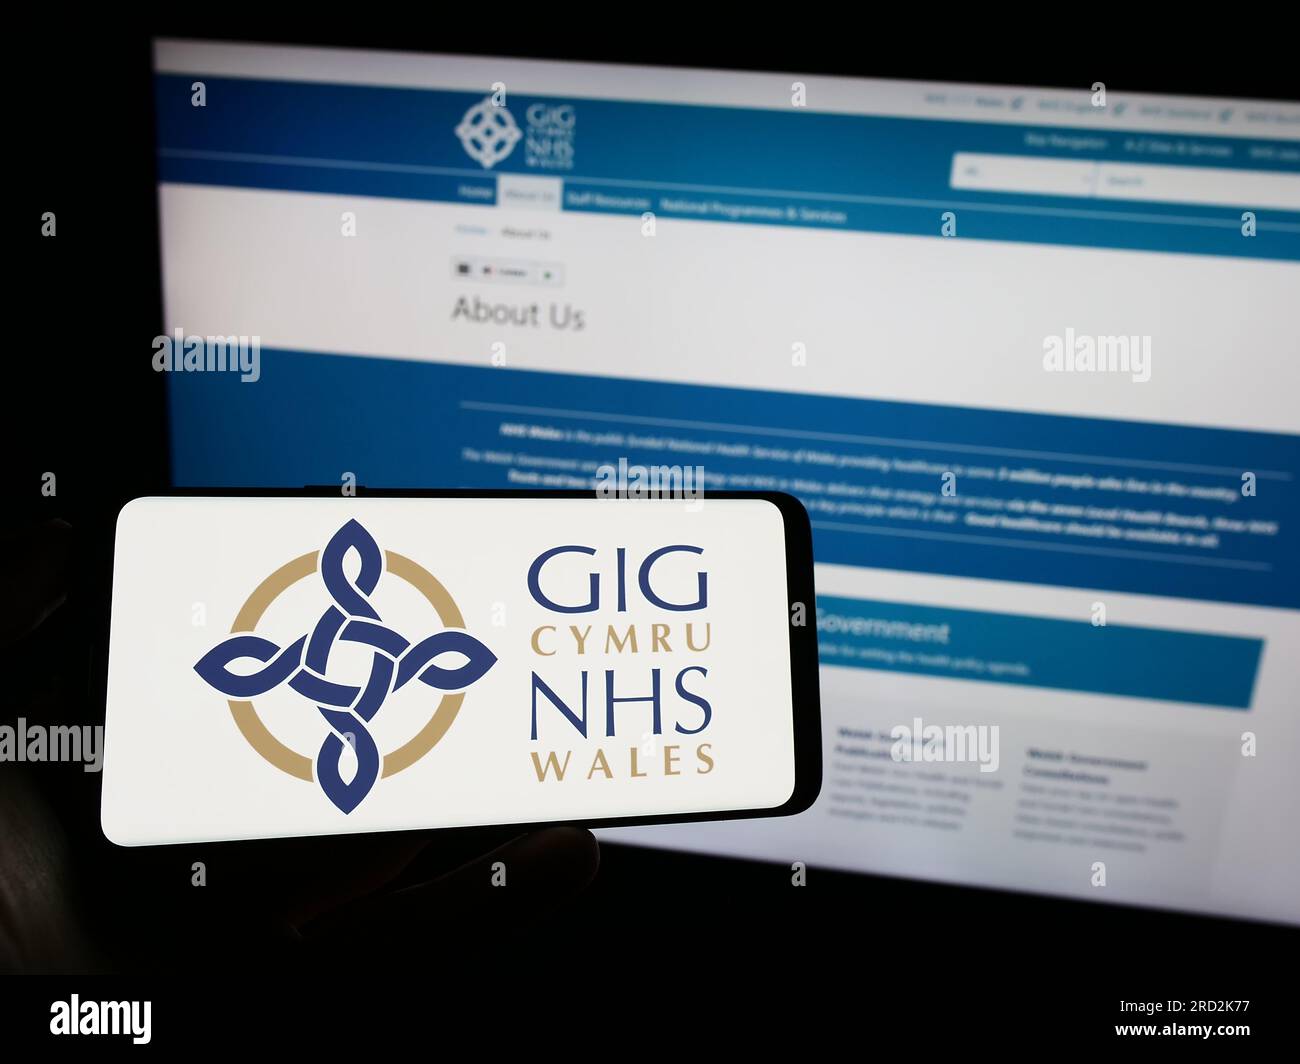 Person holding mobile phone with logo of British healthcare system NHS Wales on screen in front of web page. Focus on phone display. Stock Photo